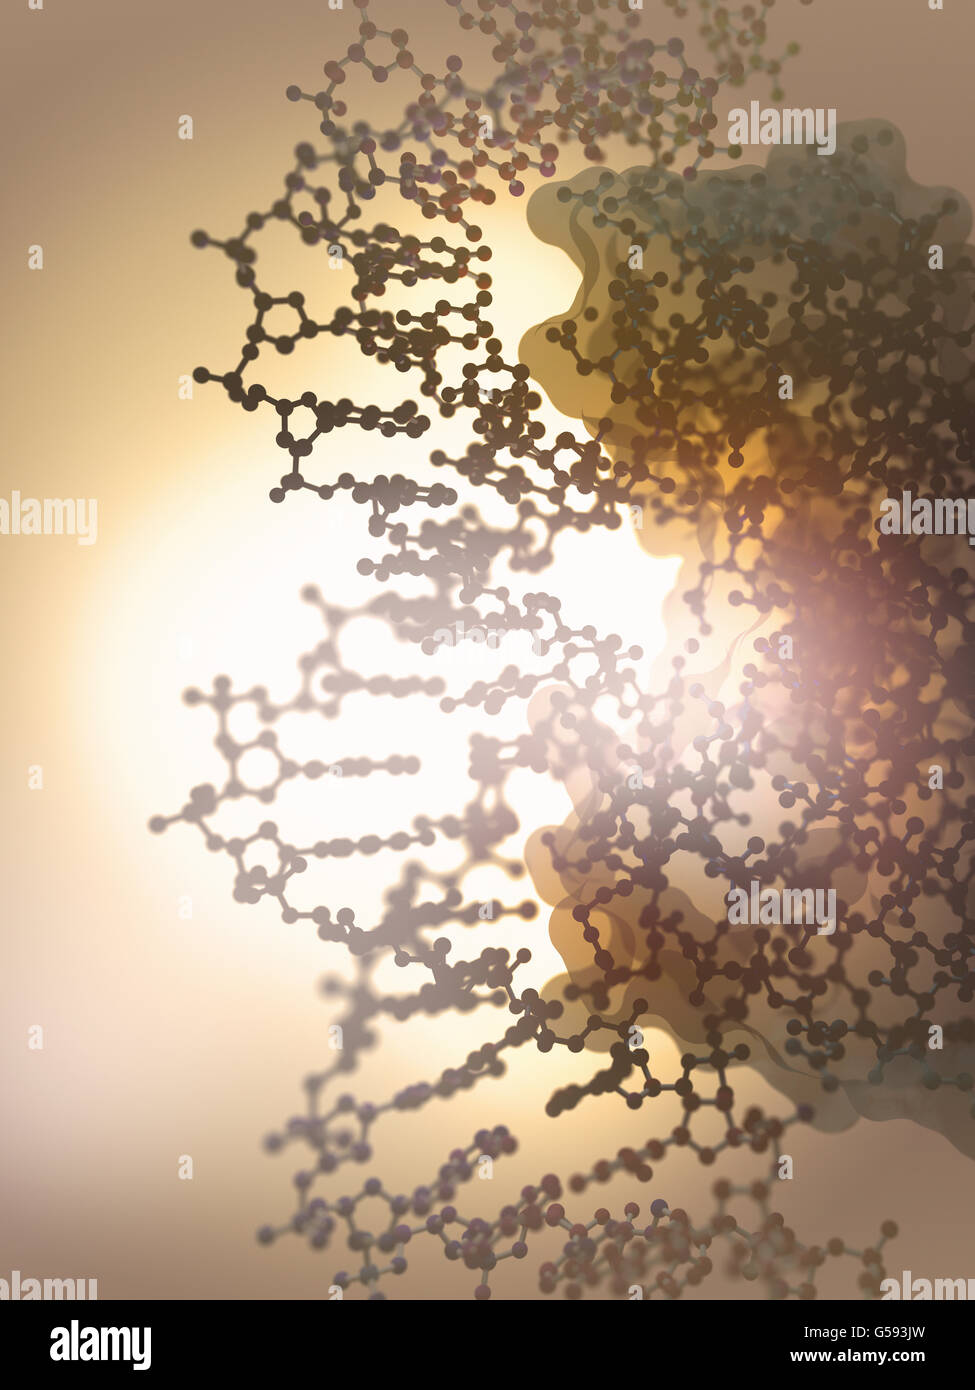 Detail of a DNA double helix molecule Stock Photo